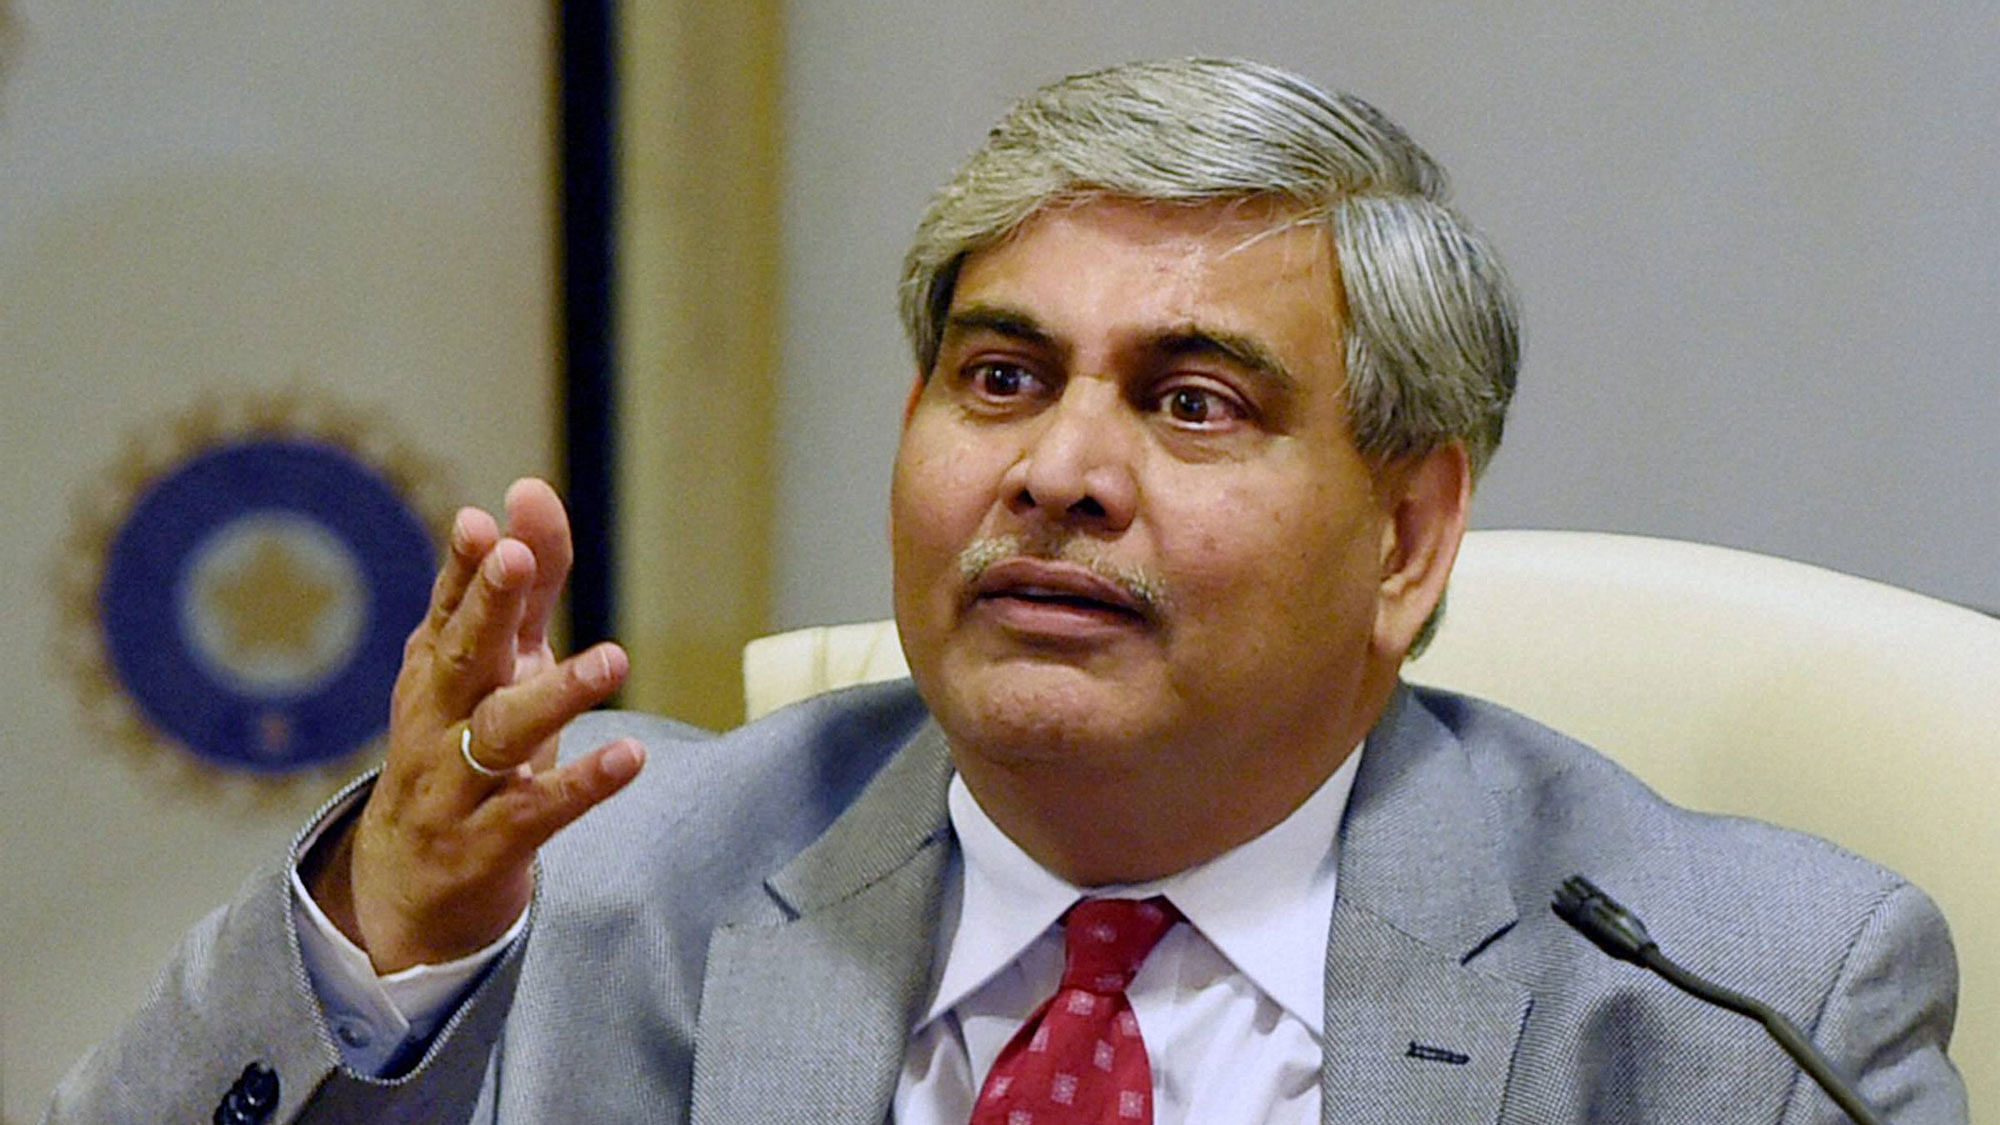 Shashank Manohar is the current ICC chairman and former BCCI president.